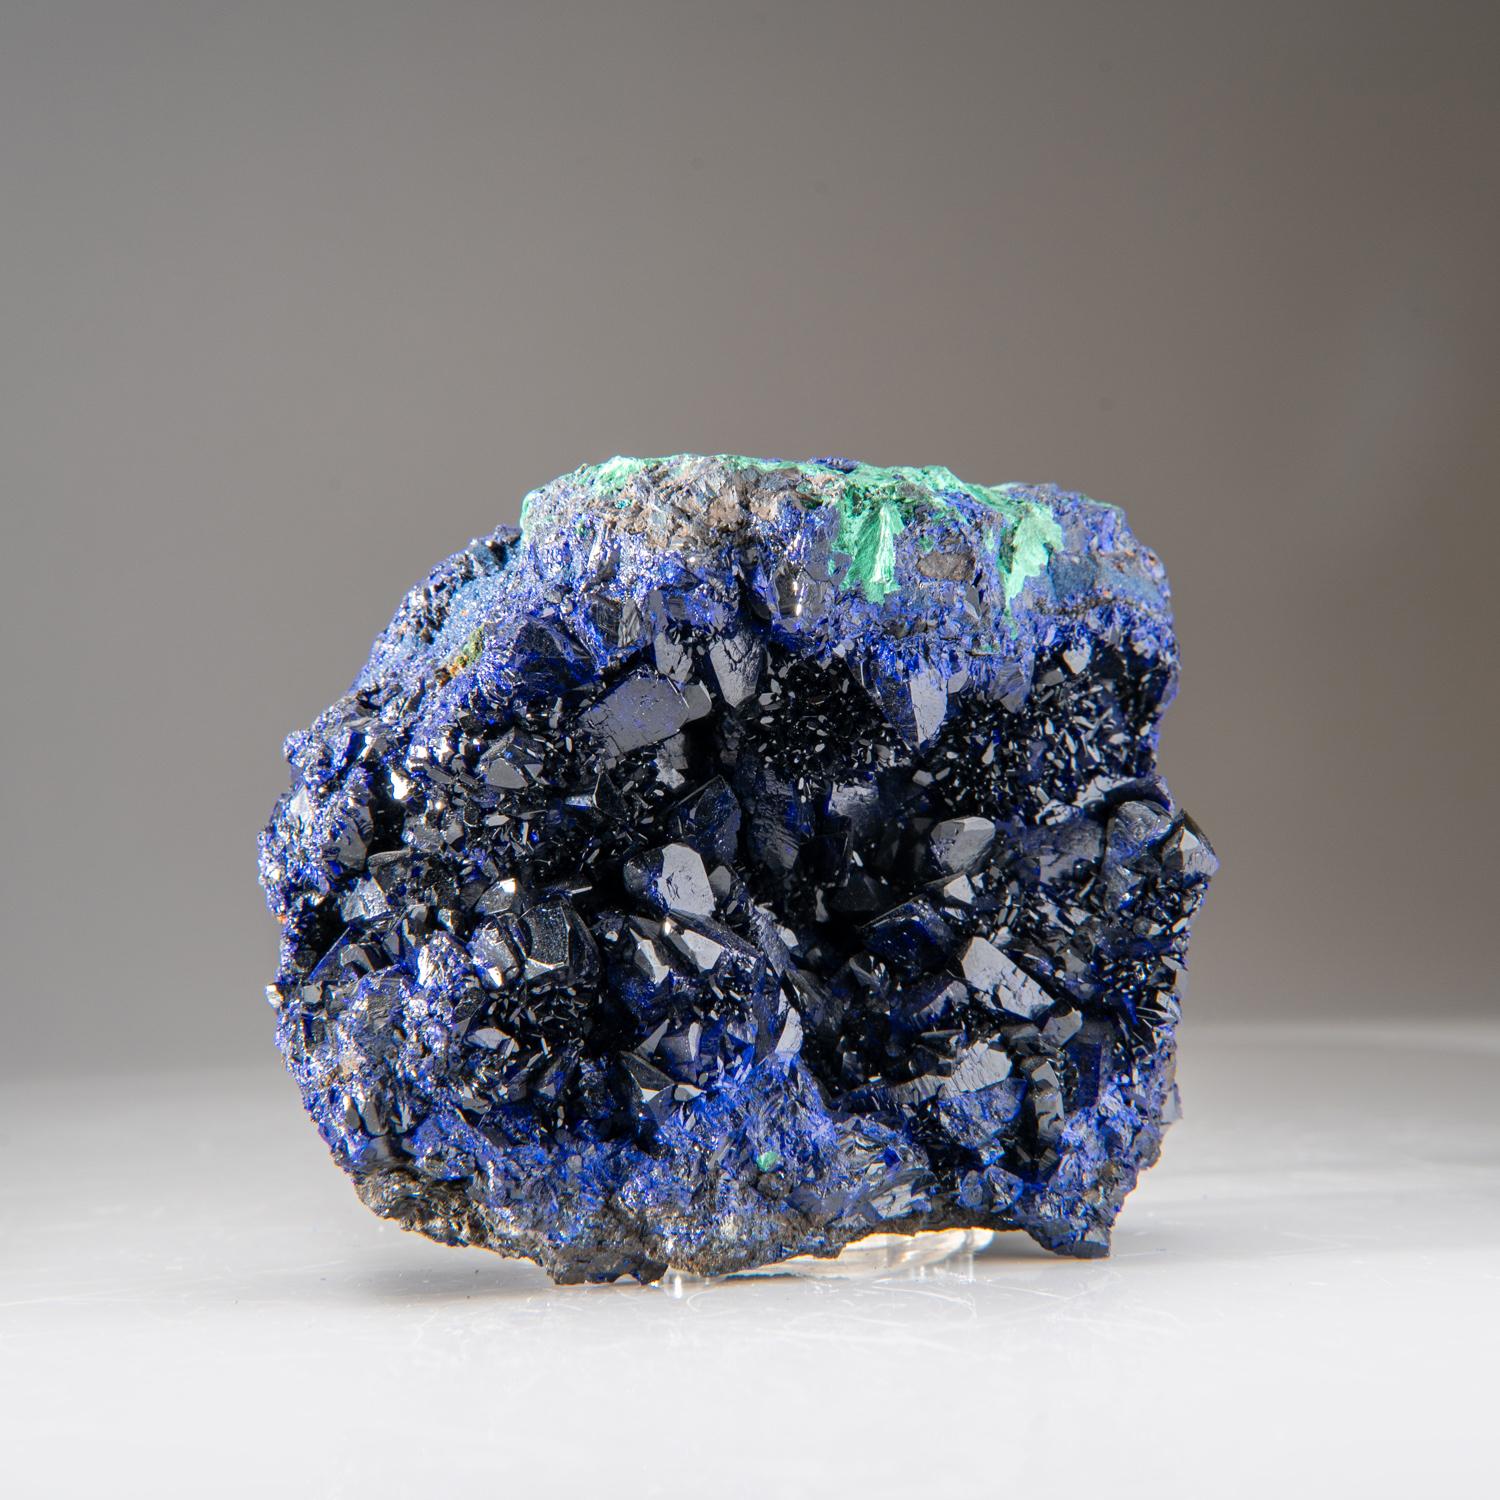 From Liufengshan Mine, Guichi, Anhui Province, China

Lustrous dark-blue azurite crystals lining cavities front and rear on a crystallized mass of azurite with with fibrous green malachite crystals around the edges of the specimen. The translucency